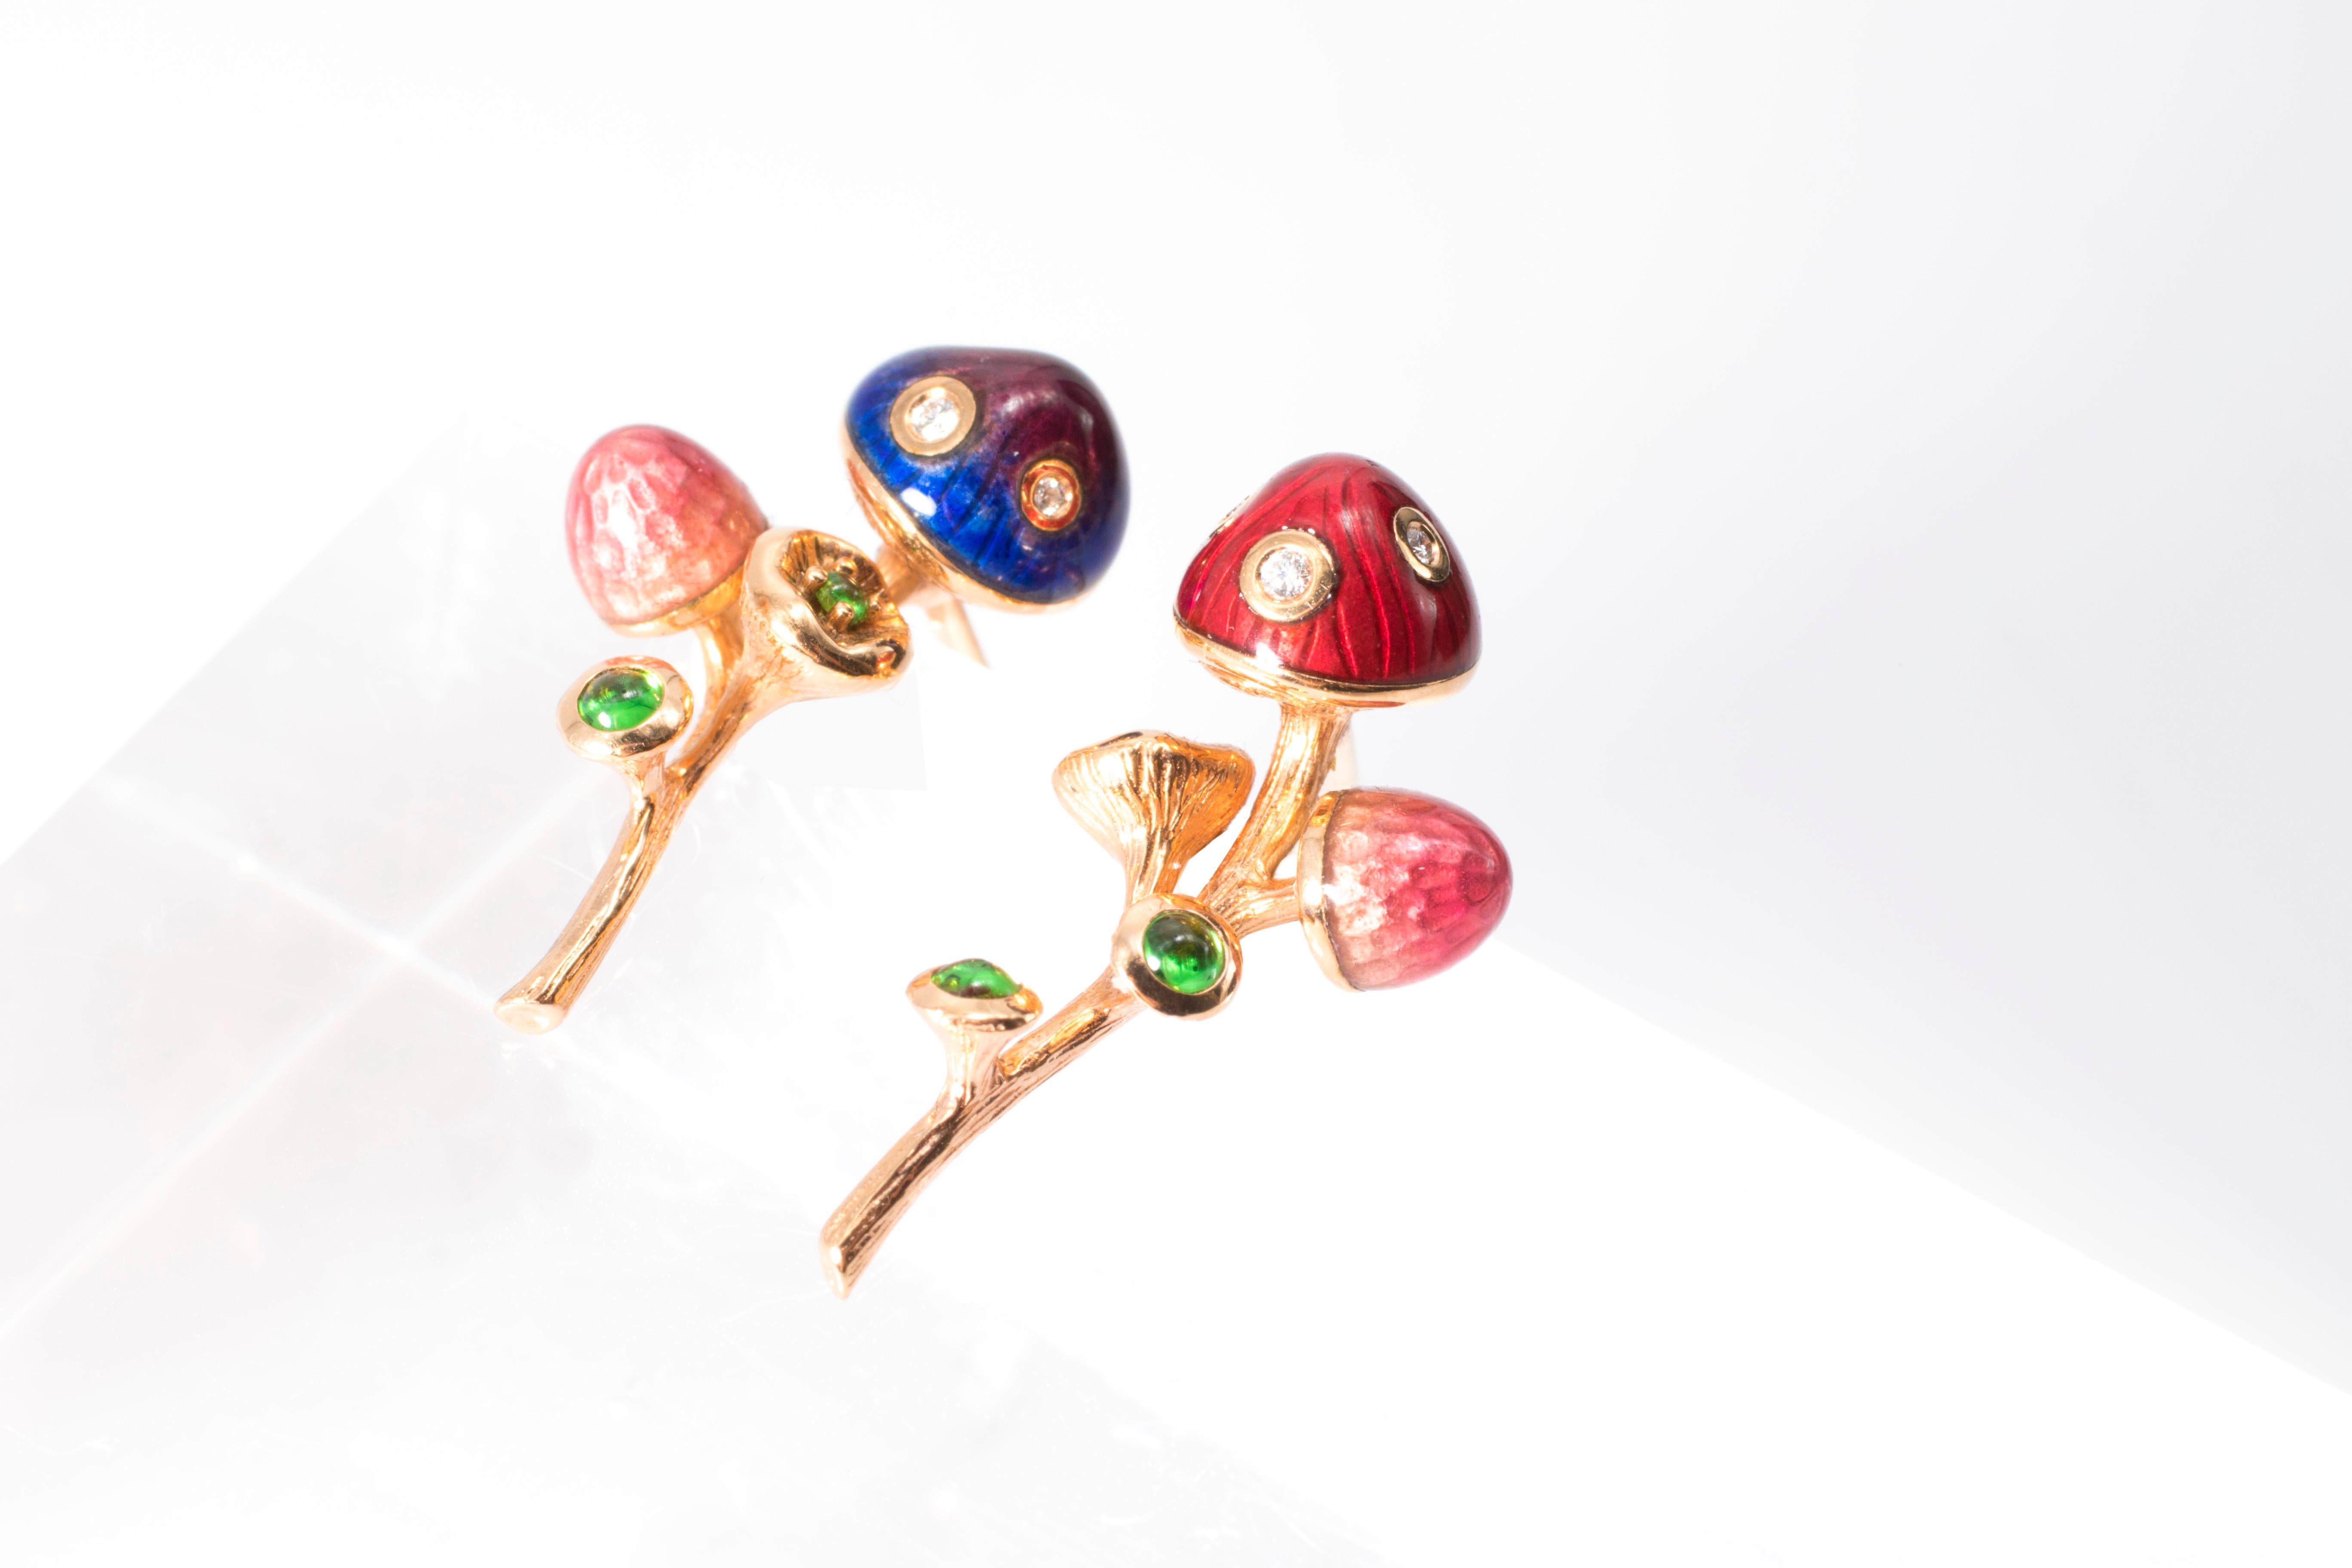 18 Karat Rose Gold Red and Blue Enamel Mushroom Asymmetrical Earrings In New Condition For Sale In Hong Kong, APAC - East Asia